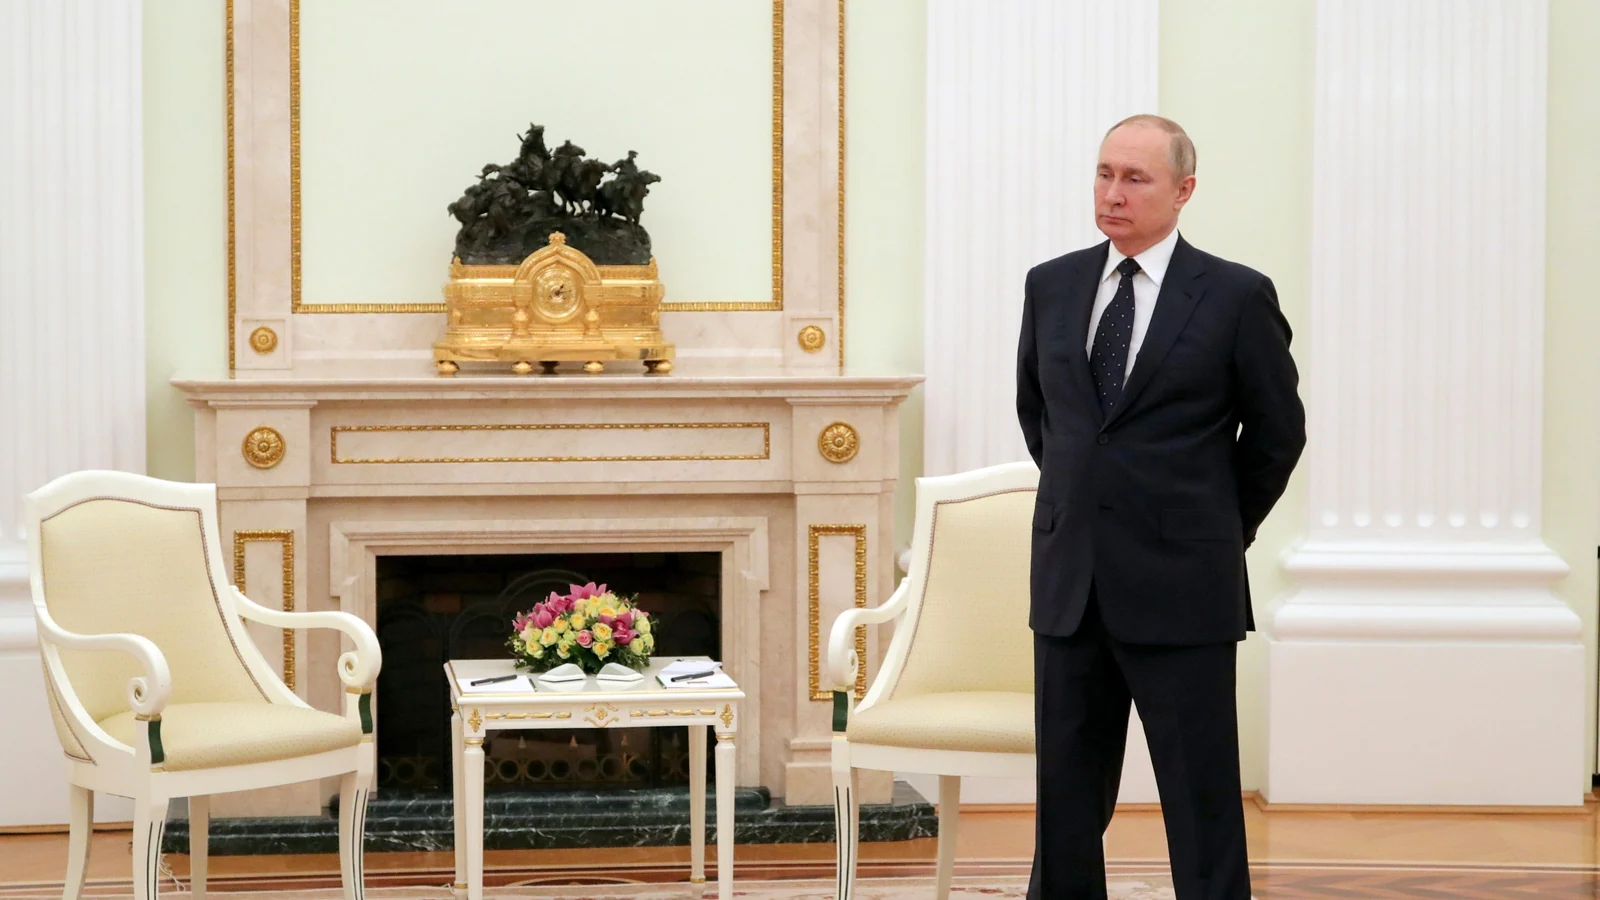 Putin says some ‘positive shifts’ in talks with Ukraine